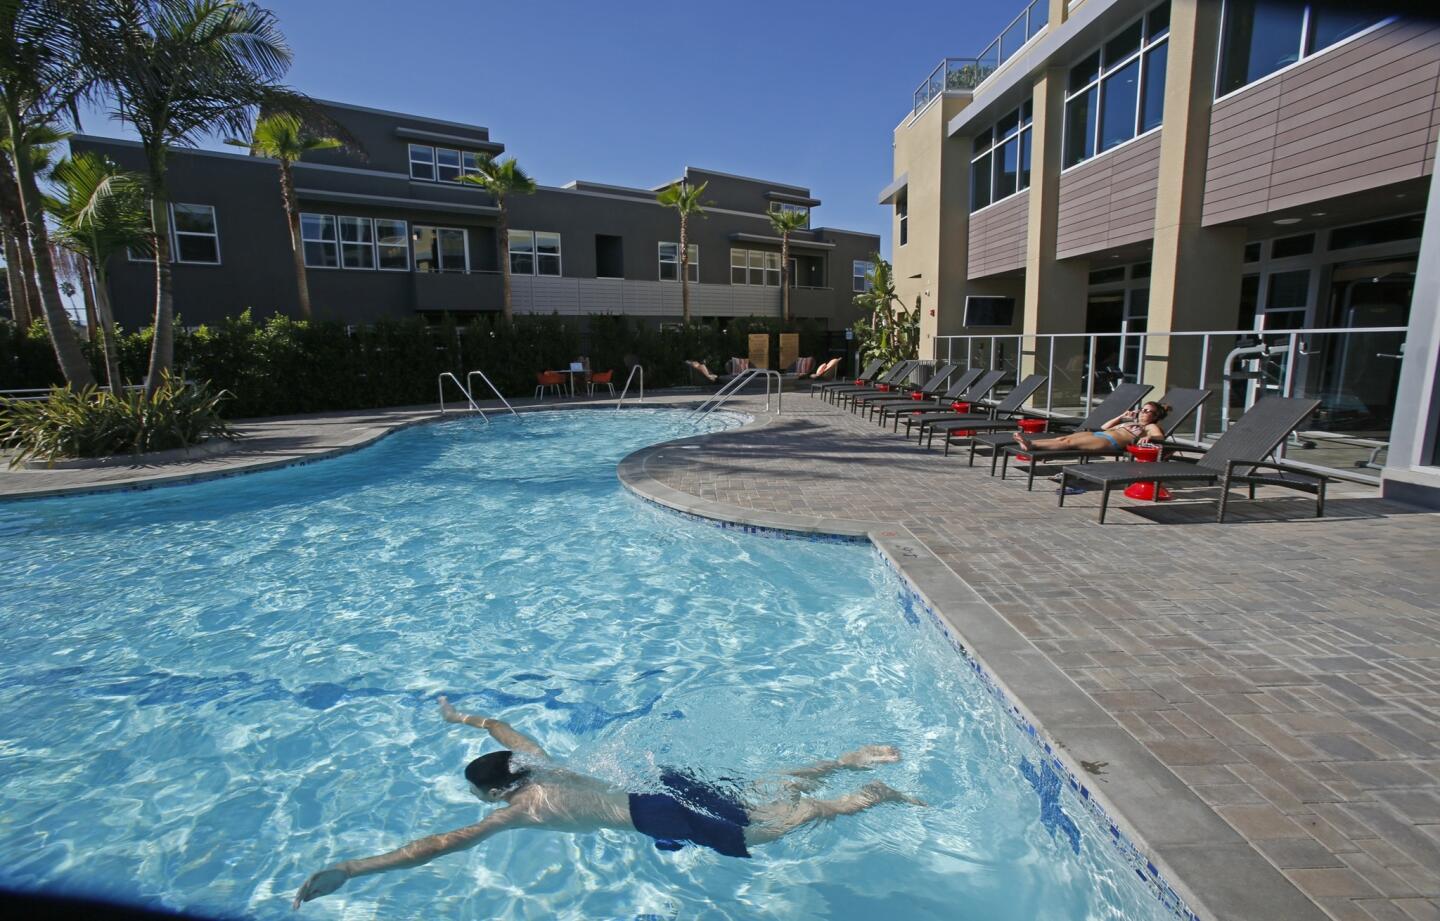 Wesley Ong swims laps in the pool at the Lincoln Place apartments in Venice